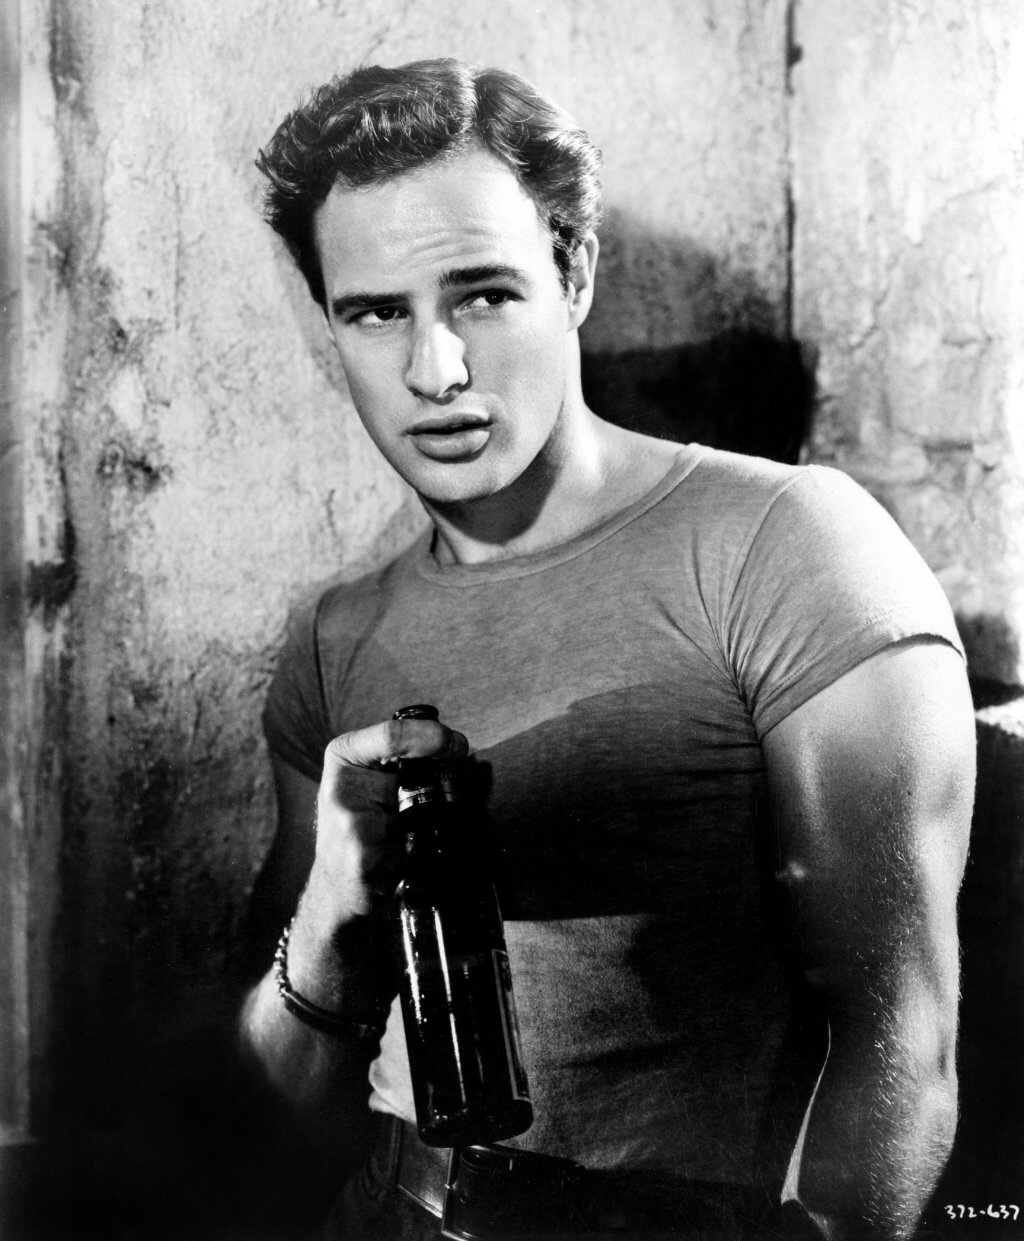 5 Day Marlon Brando Streetcar Named Desire Workout with Comfort Workout Clothes